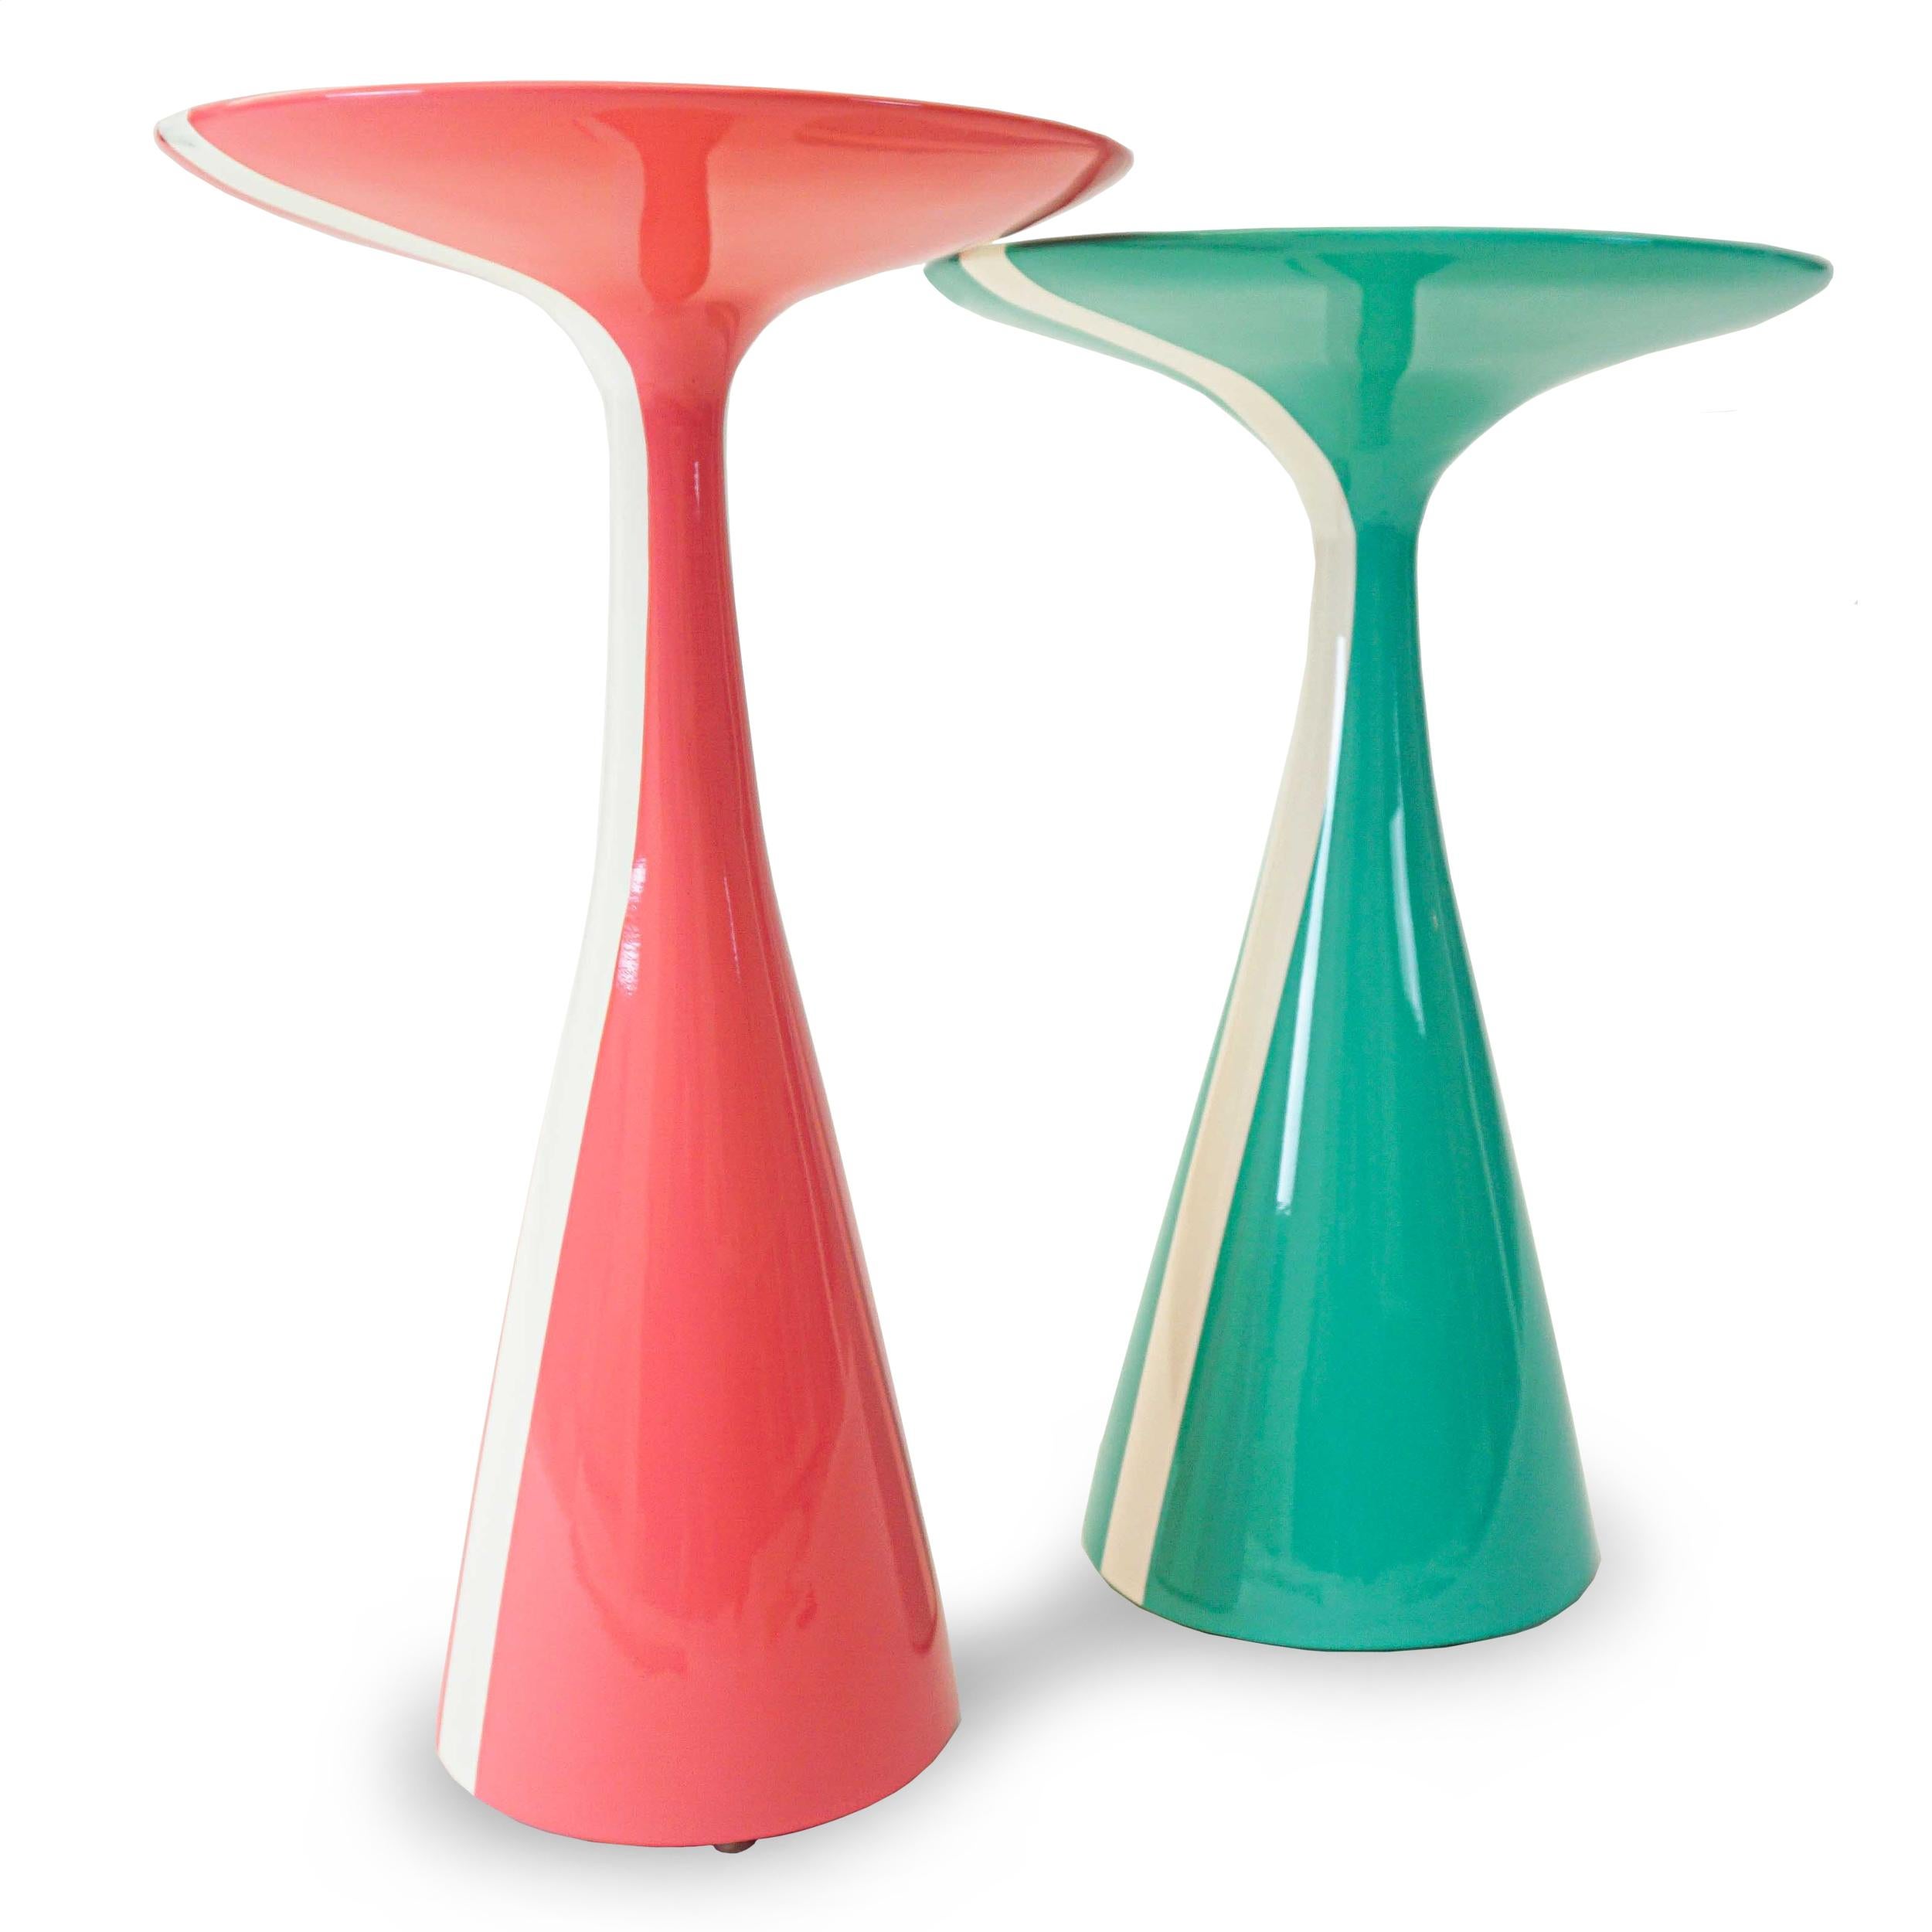 Our Stiletto table design with a fresh white stripe running across the top is made of solid hard maple and lacquered in high gloss finish. Shown here in a rich pink grapefruit and mint colors, but can be made in custom sizes and any paint color. As